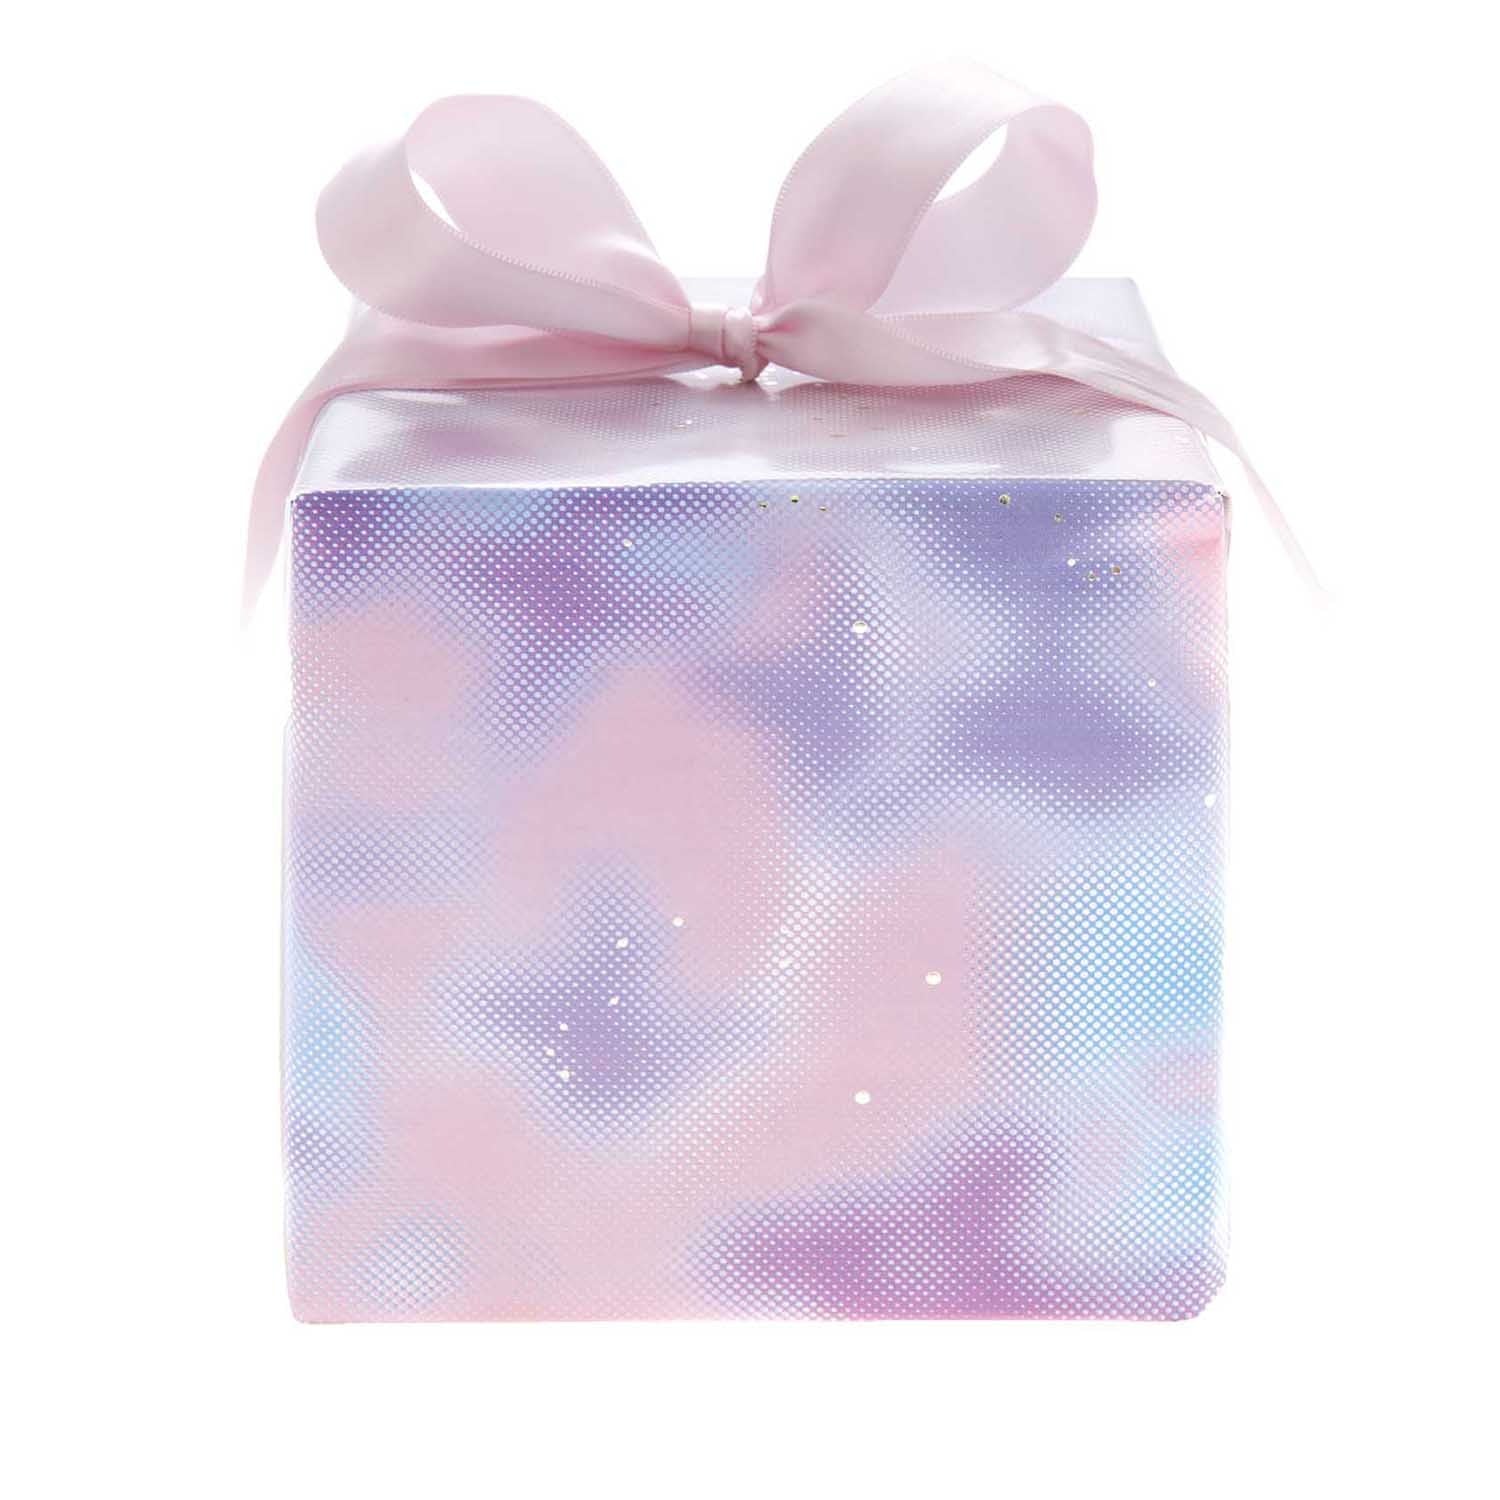 Paper Poetry Gift Wrap Roll - Blurry